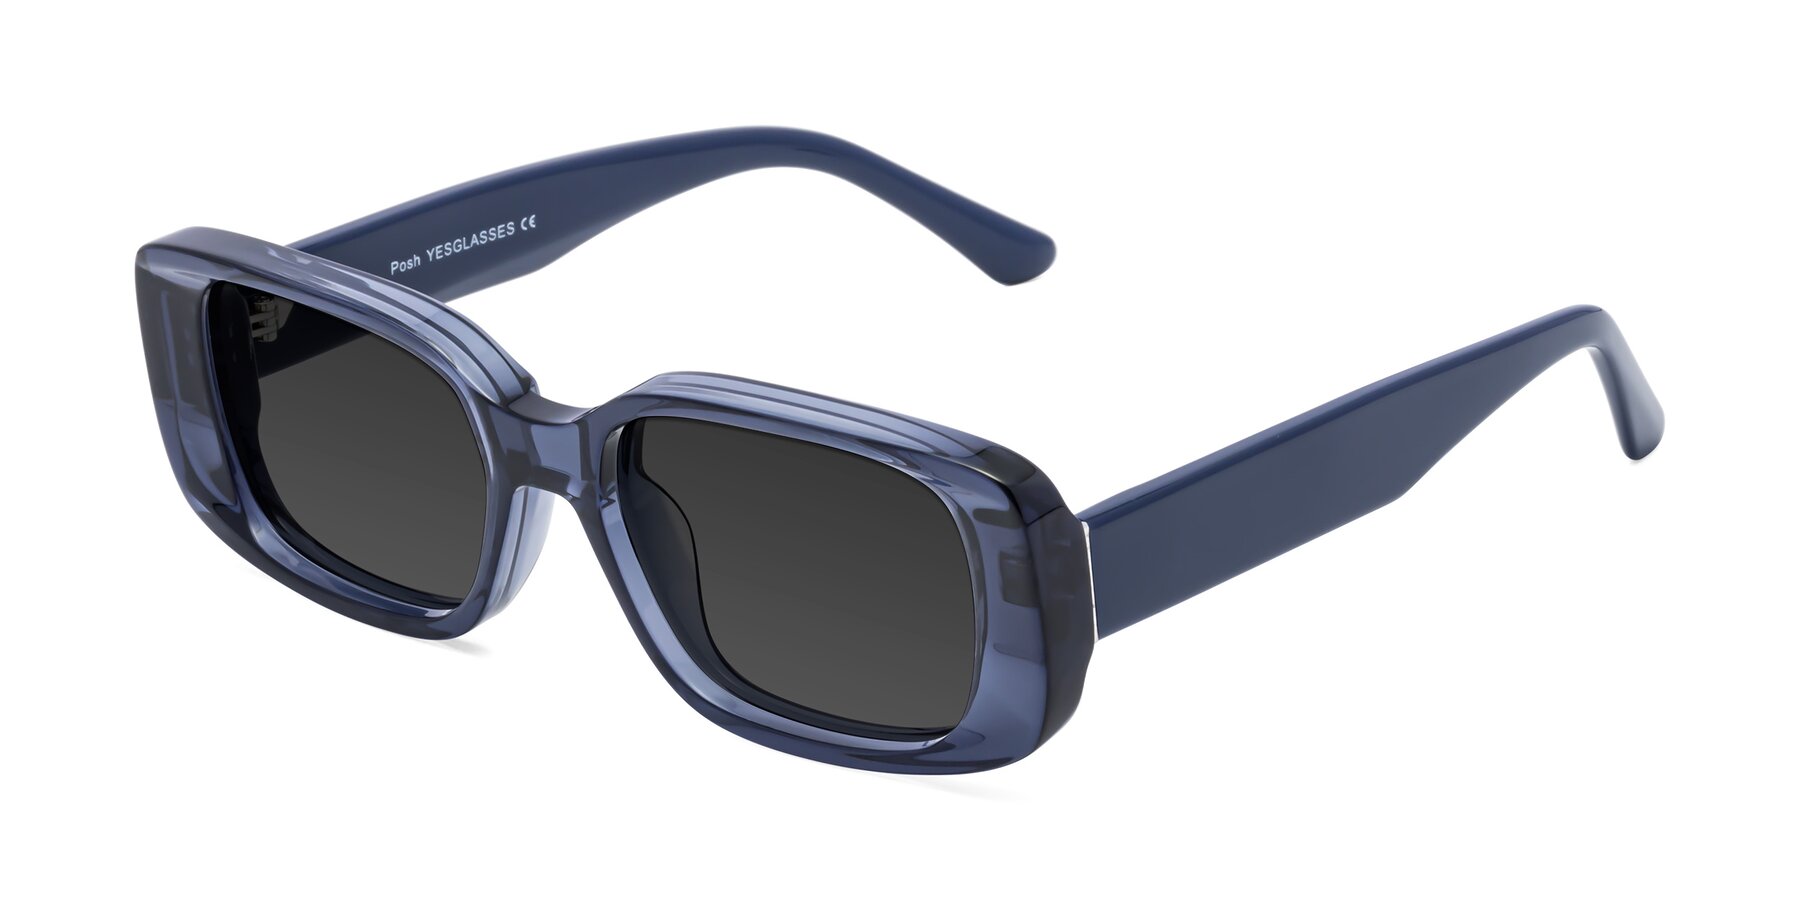 Angle of Posh in Translucent Blue with Gray Tinted Lenses